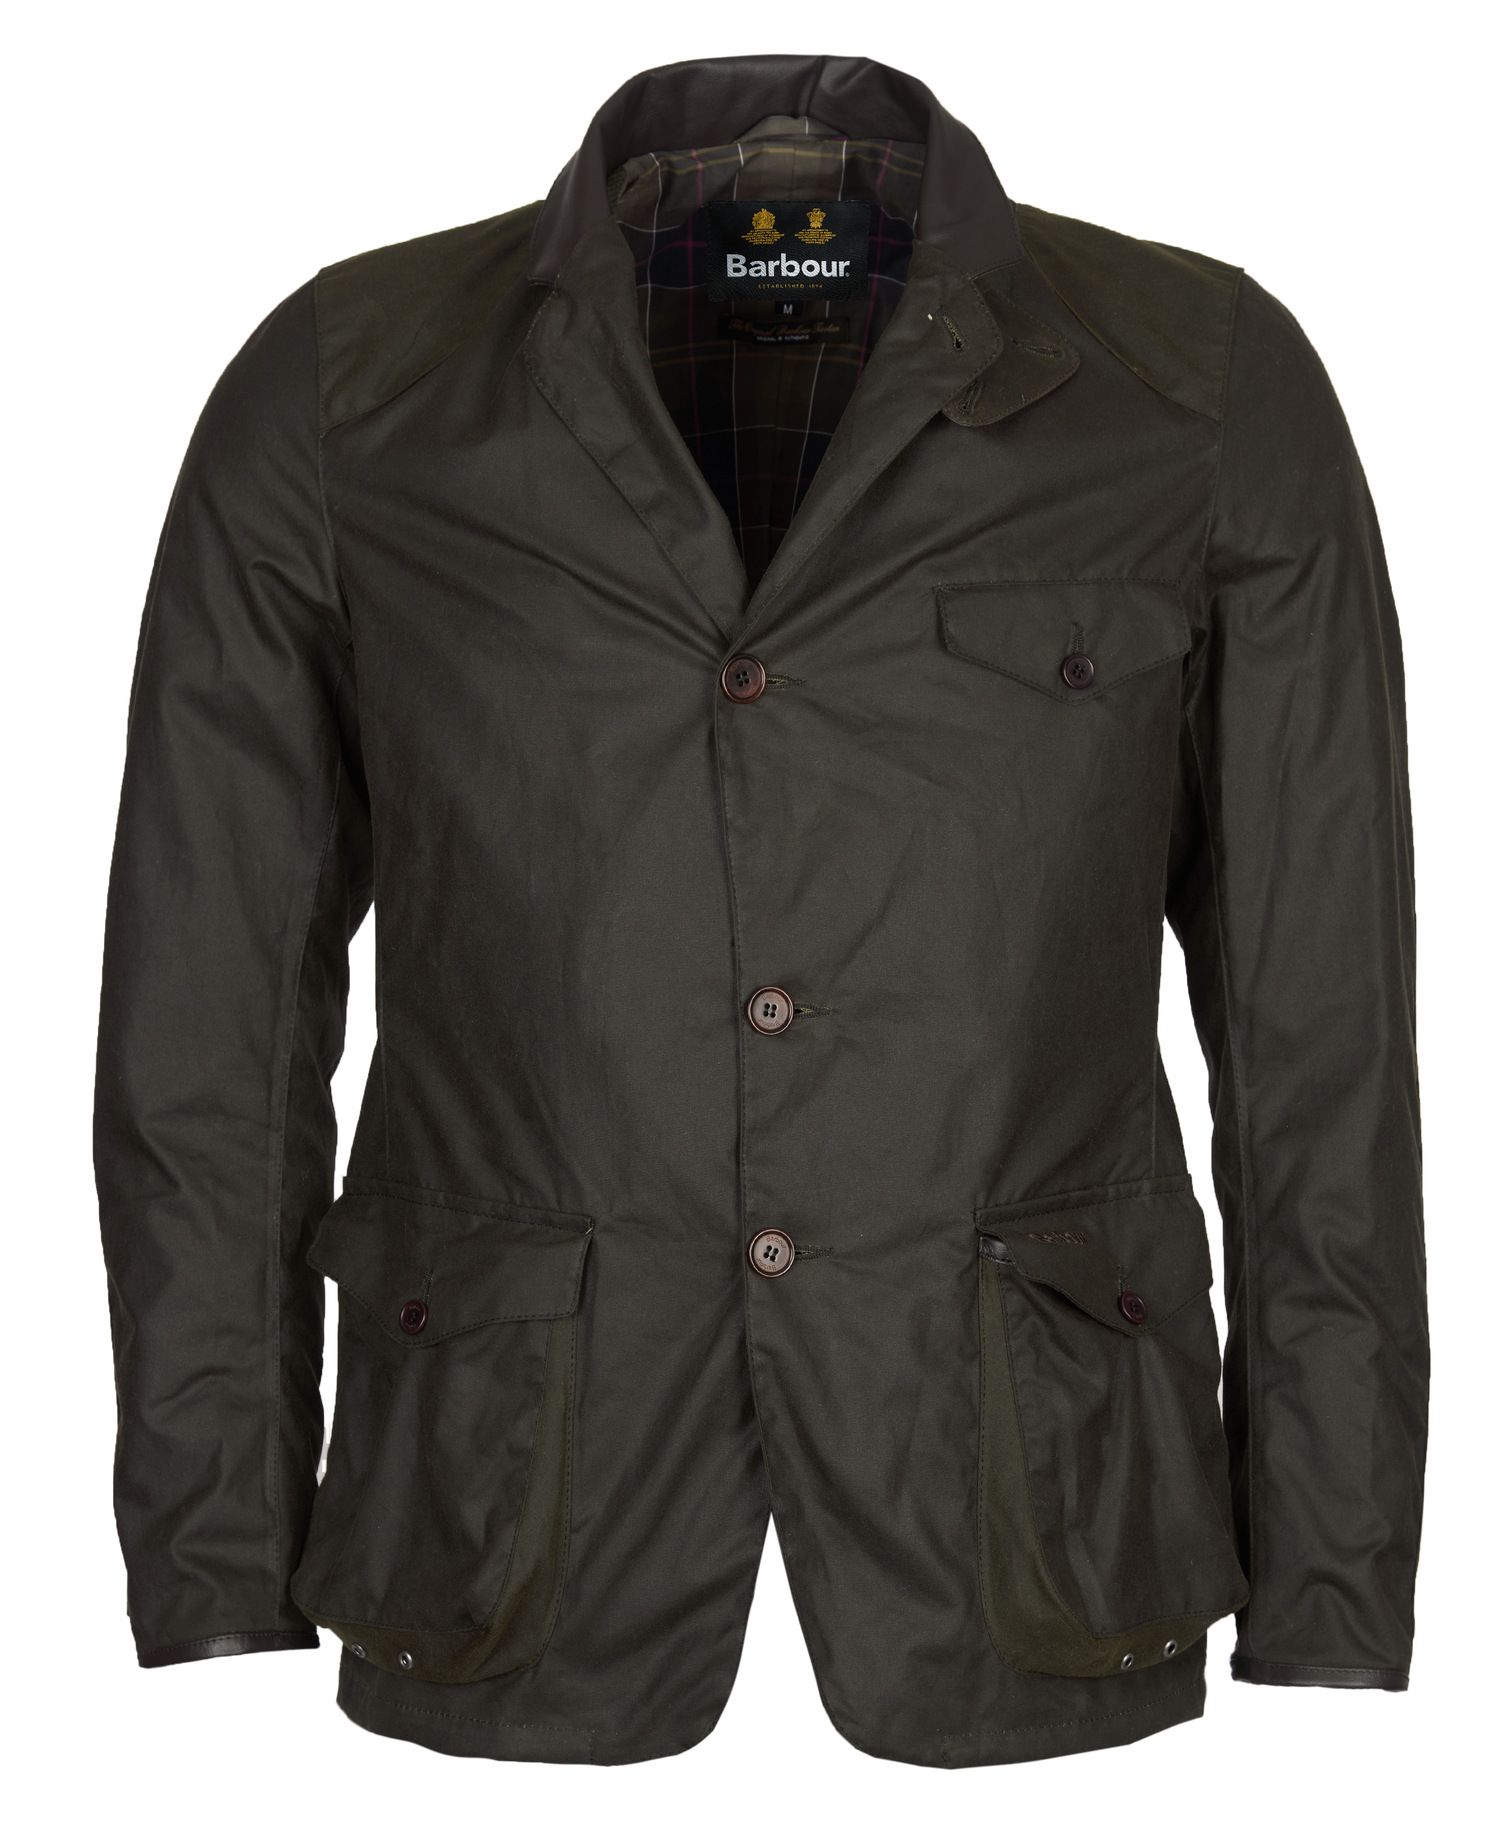 Barbour Beacon Sports Wax Jacket